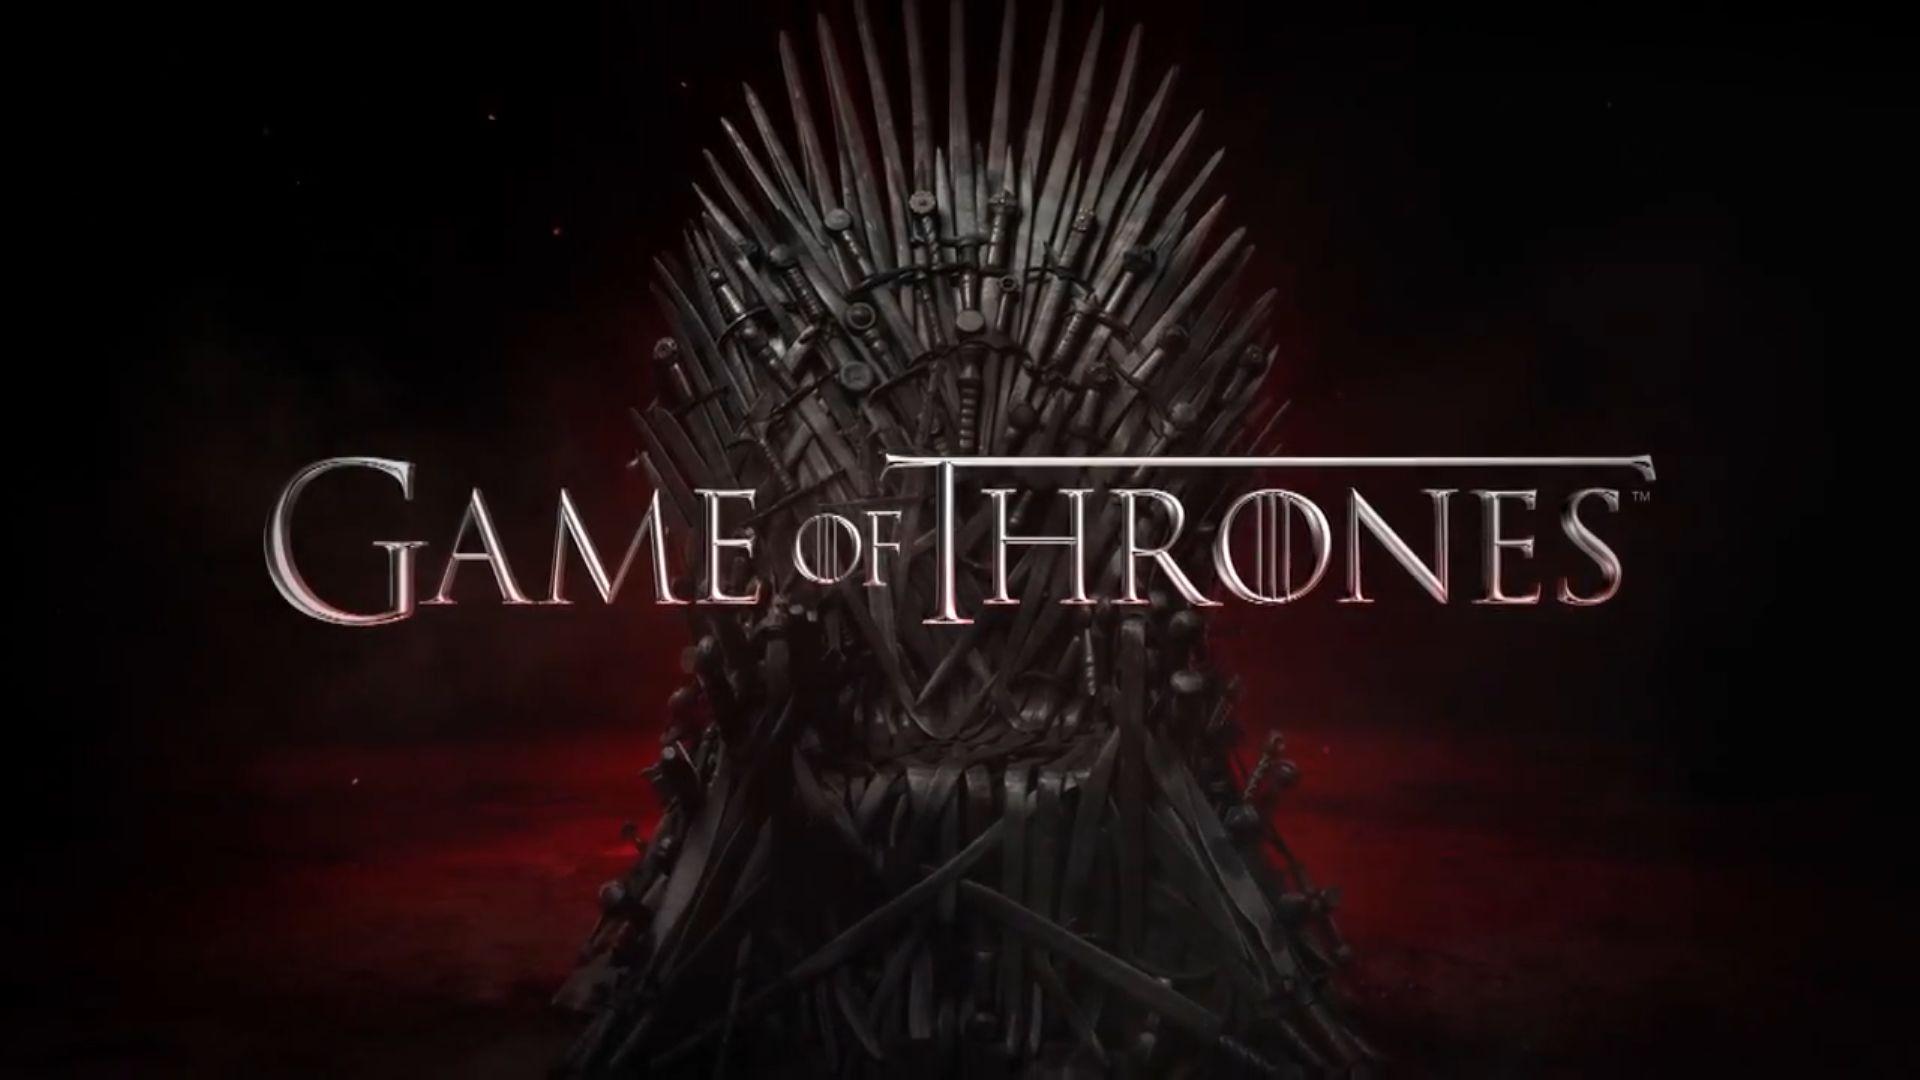 Valar Morghulis: Hype Train begins with the First Game of Thrones